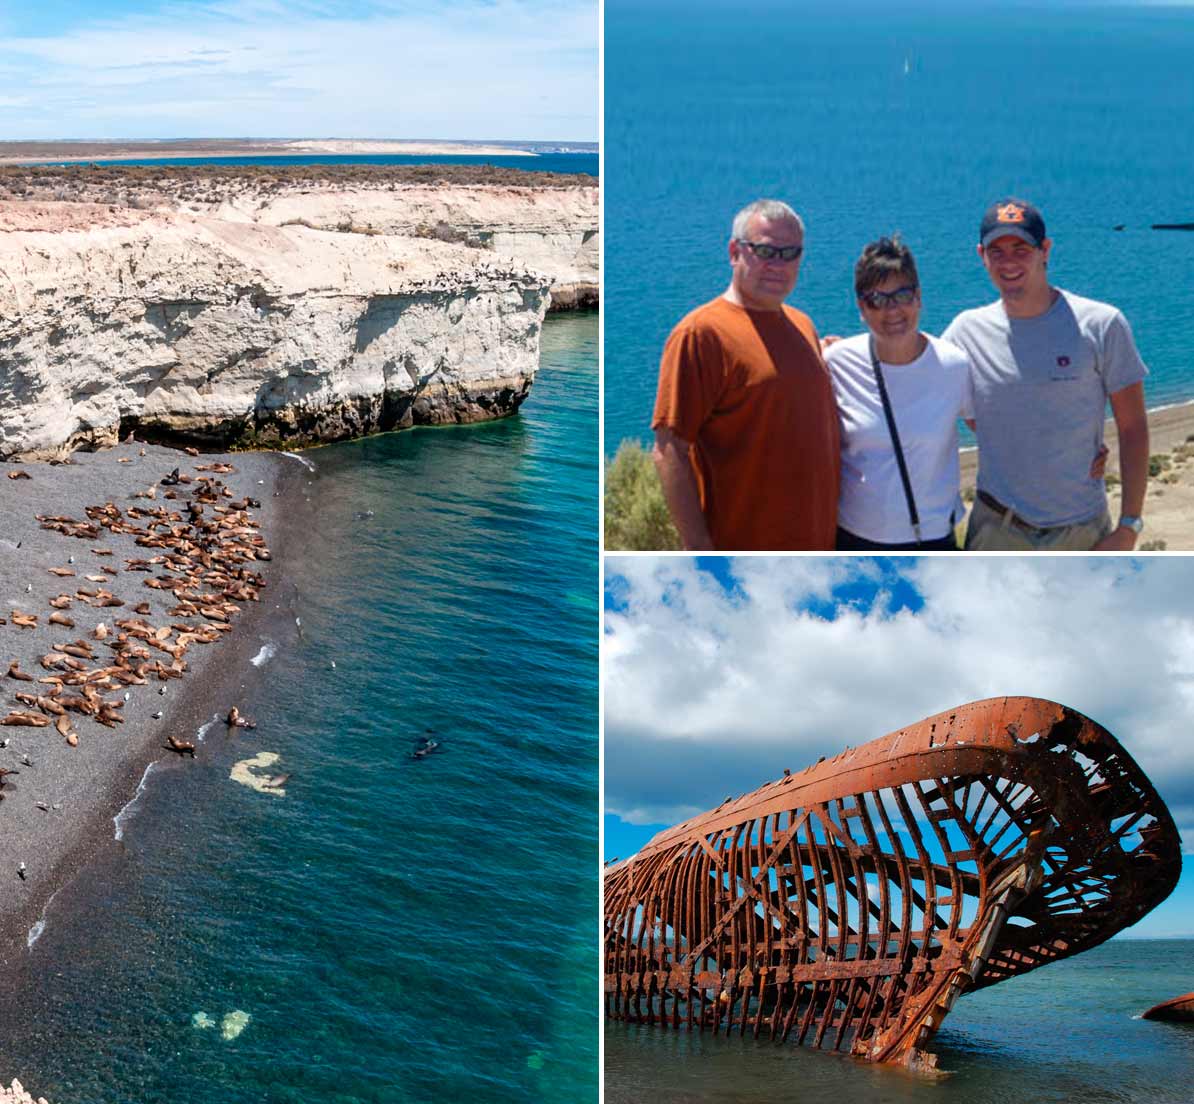 A collage showing a beach covered in sea lions, a group of tourists, and a shipwreck.